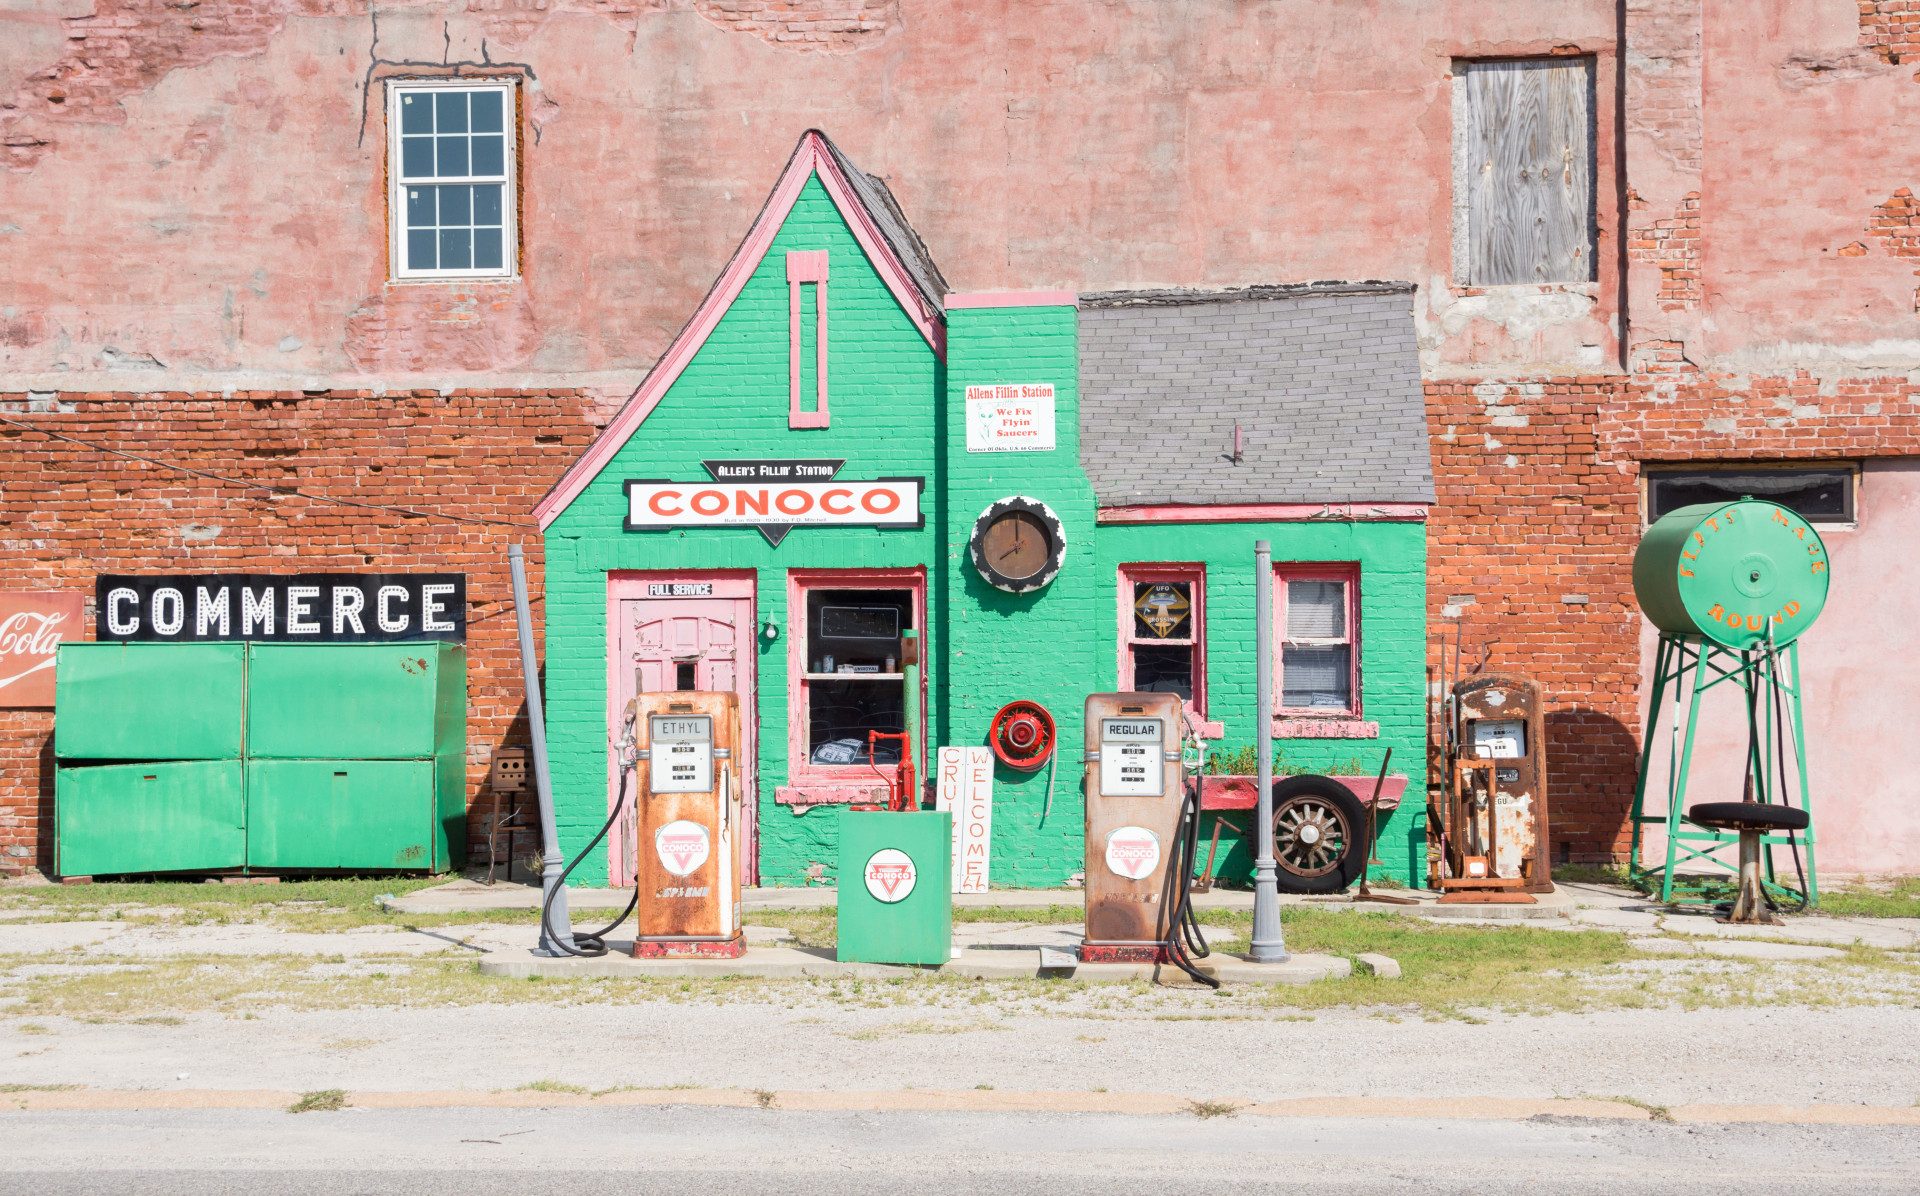 The historic and carefully preserved Conoco garage replete with rusting, long retired pumps. It stands in the town of Commerce.